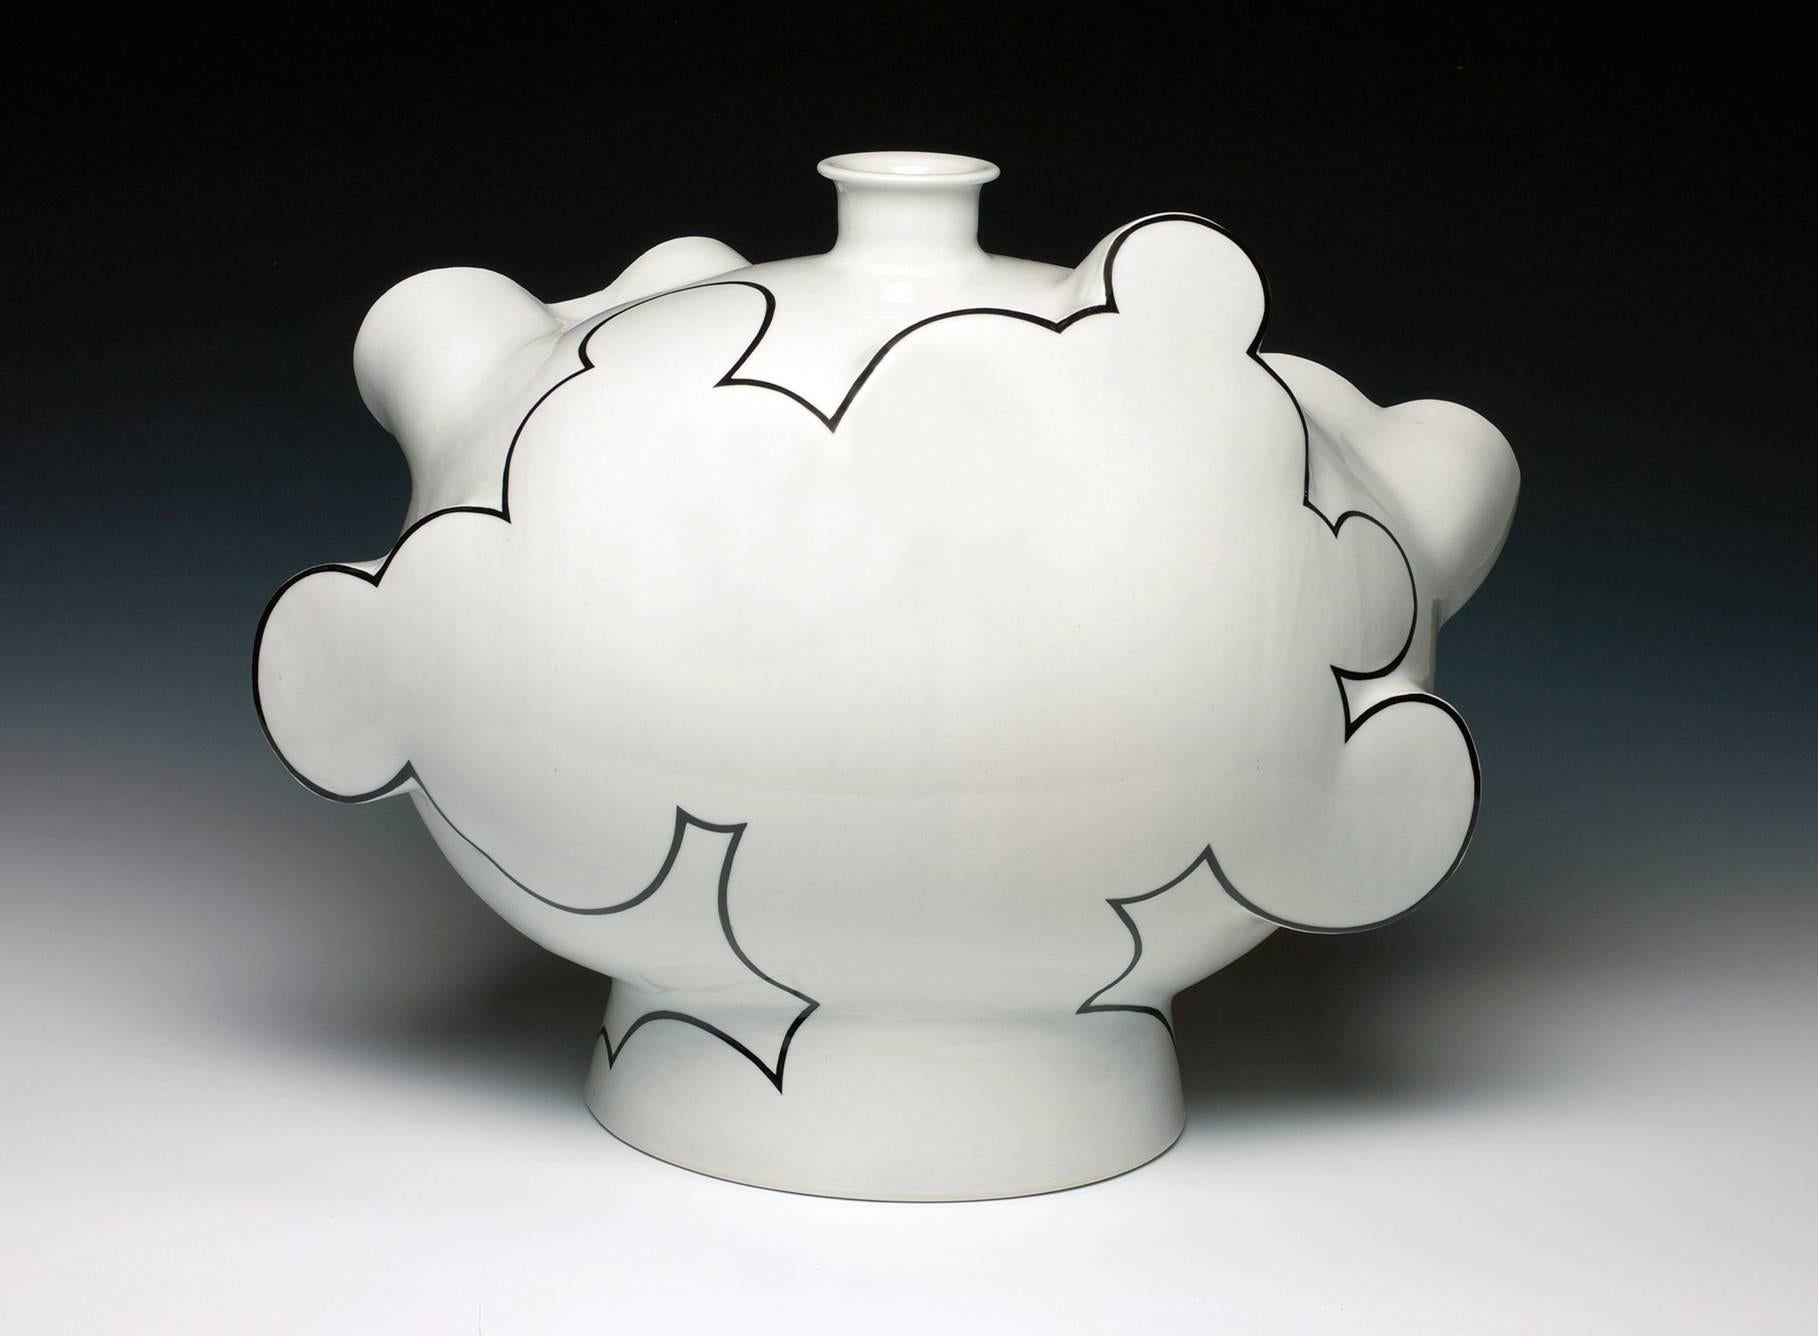 Sam Chung Abstract Sculpture - "Cloud Bottle", Contemporary Porcelain Sculpture with Glaze and China Paint